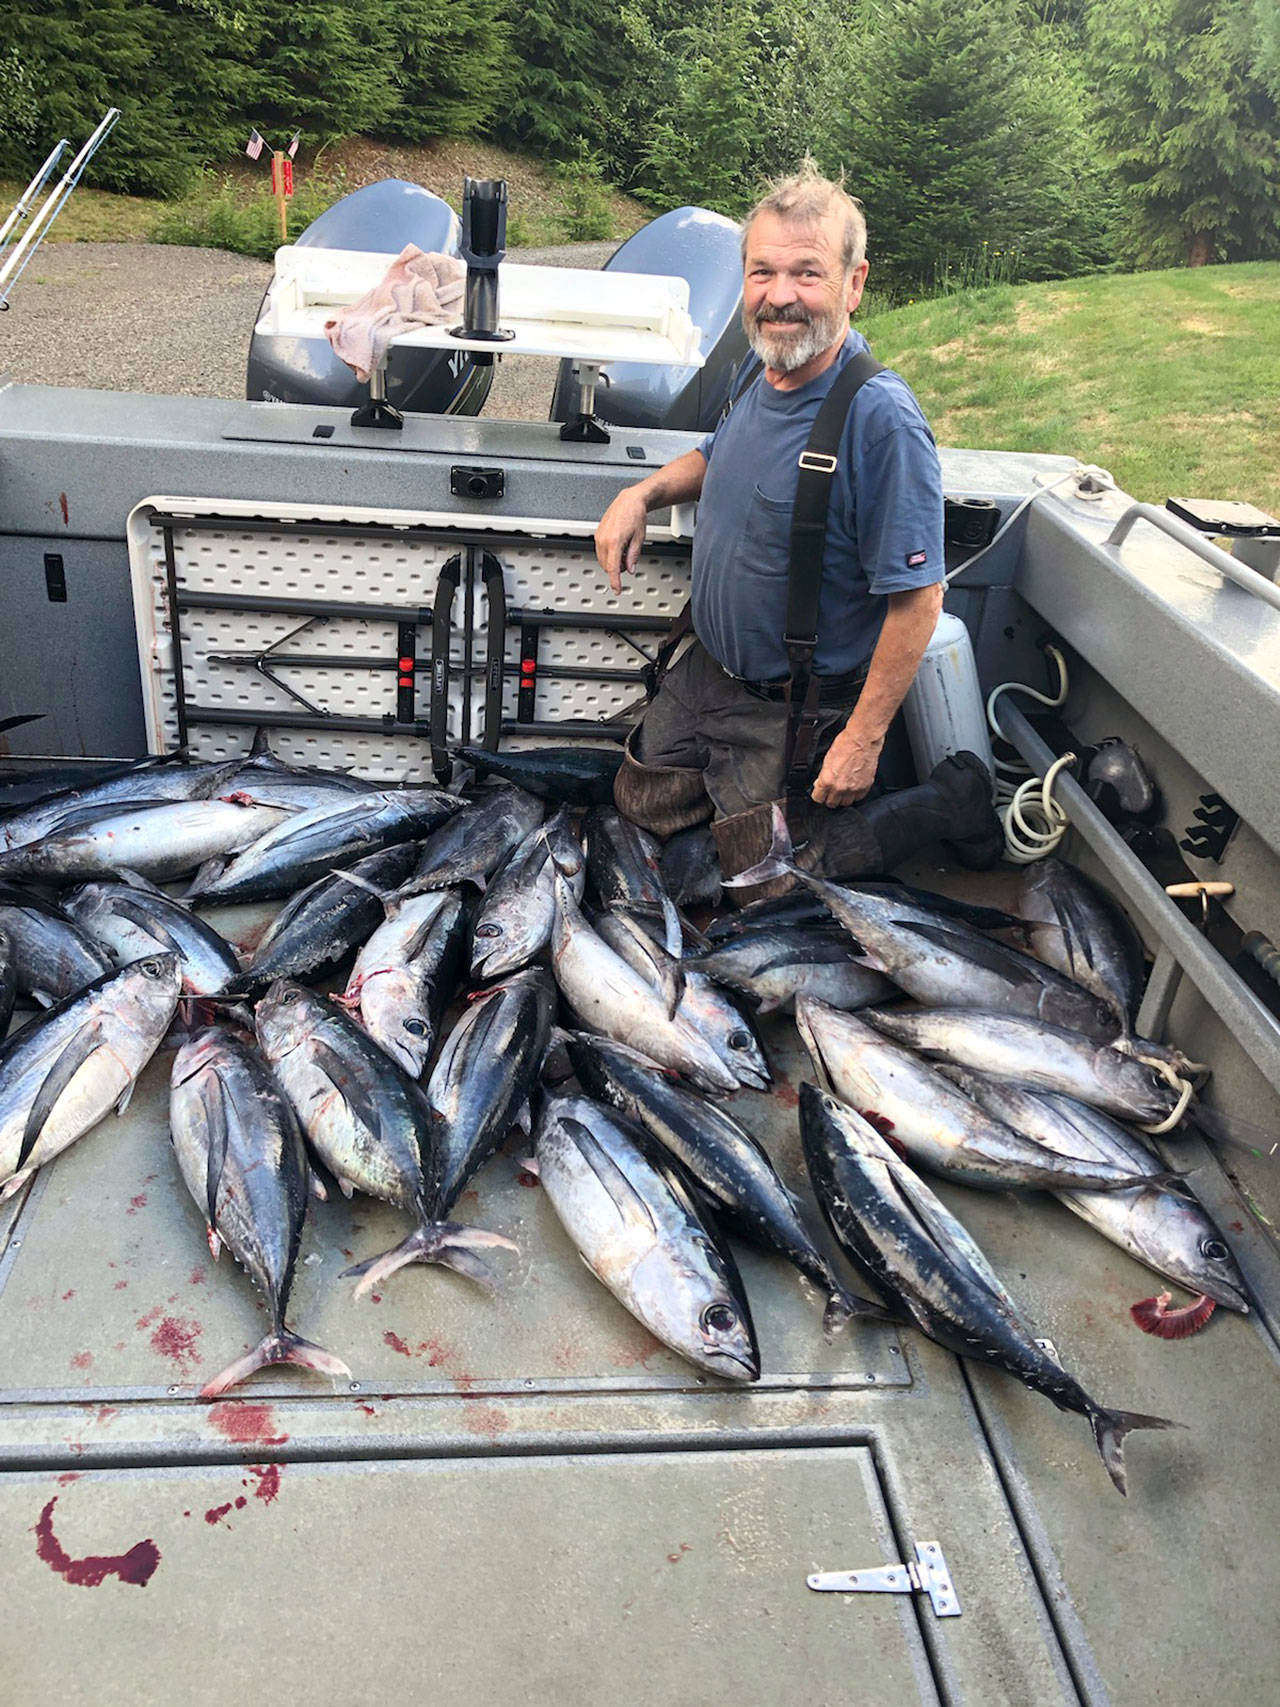 Port Angeles angler George Schoenfeldt along with Bill Heilman, Anthony Joe Gort and Russell Thorn recently caught these albacore tuna while fishing 45 miles off of La Push.